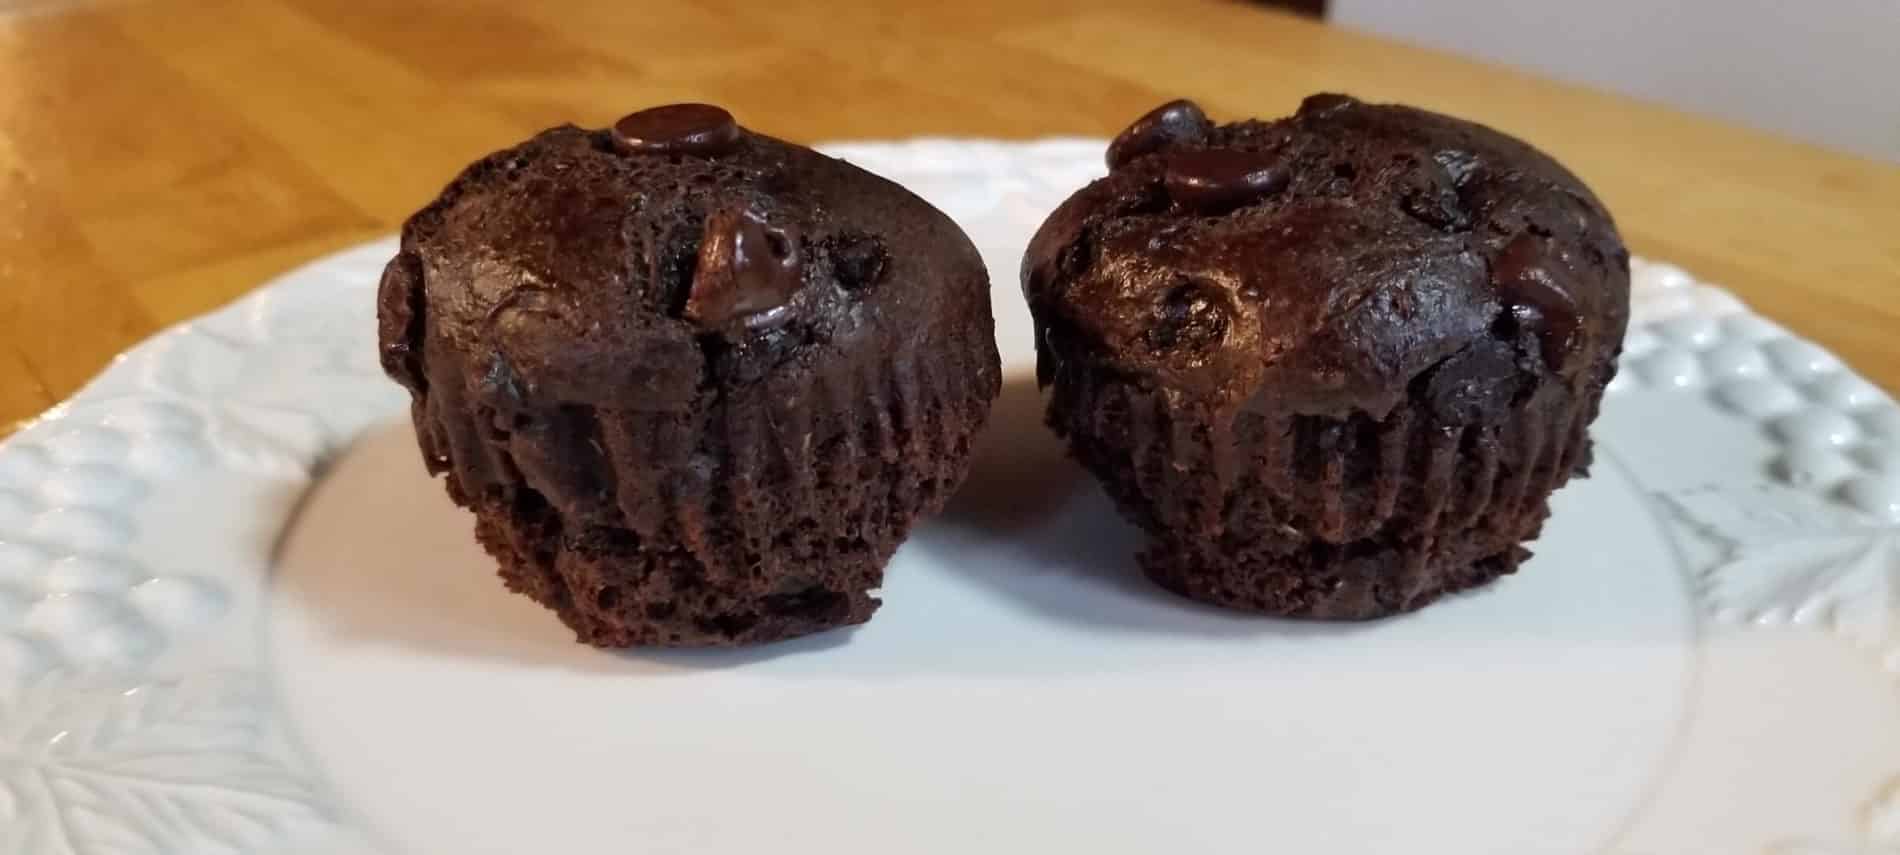 2 choclate muffins on a white plate